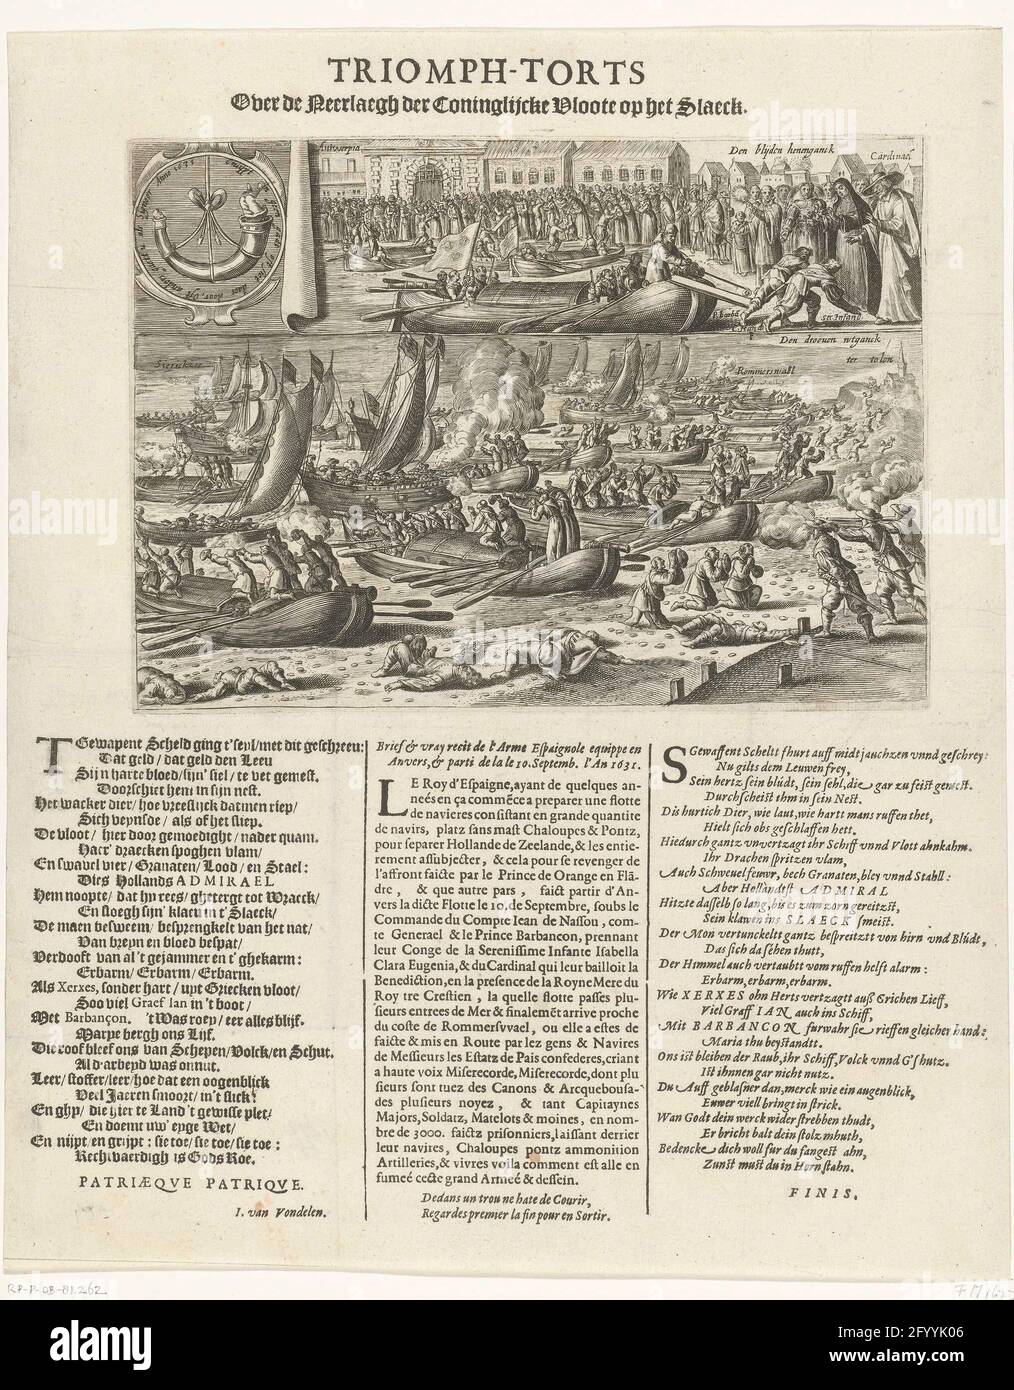 Start of the expedition in Antwerp and unfortunate end during the battle on the slake, 1631; Triomph torts across the Nelagh der Coninglijcke fleet on the Slaeck. Start from the expedition in Antwerp on September 10 and unfortunate end during the Battle of Slaak, September 13 1631. The state fleet under the command of vice-admiral Marinus Hollare. Sheet with two performances. Above embankment and departure of the fleet from Antwerp and the blessing of Count Johan van Nassau-Siegen and the Prince of Barbançon, the commanders of the Spanish fleet, by the Cardinal in the presence of Isabella Clar Stock Photo